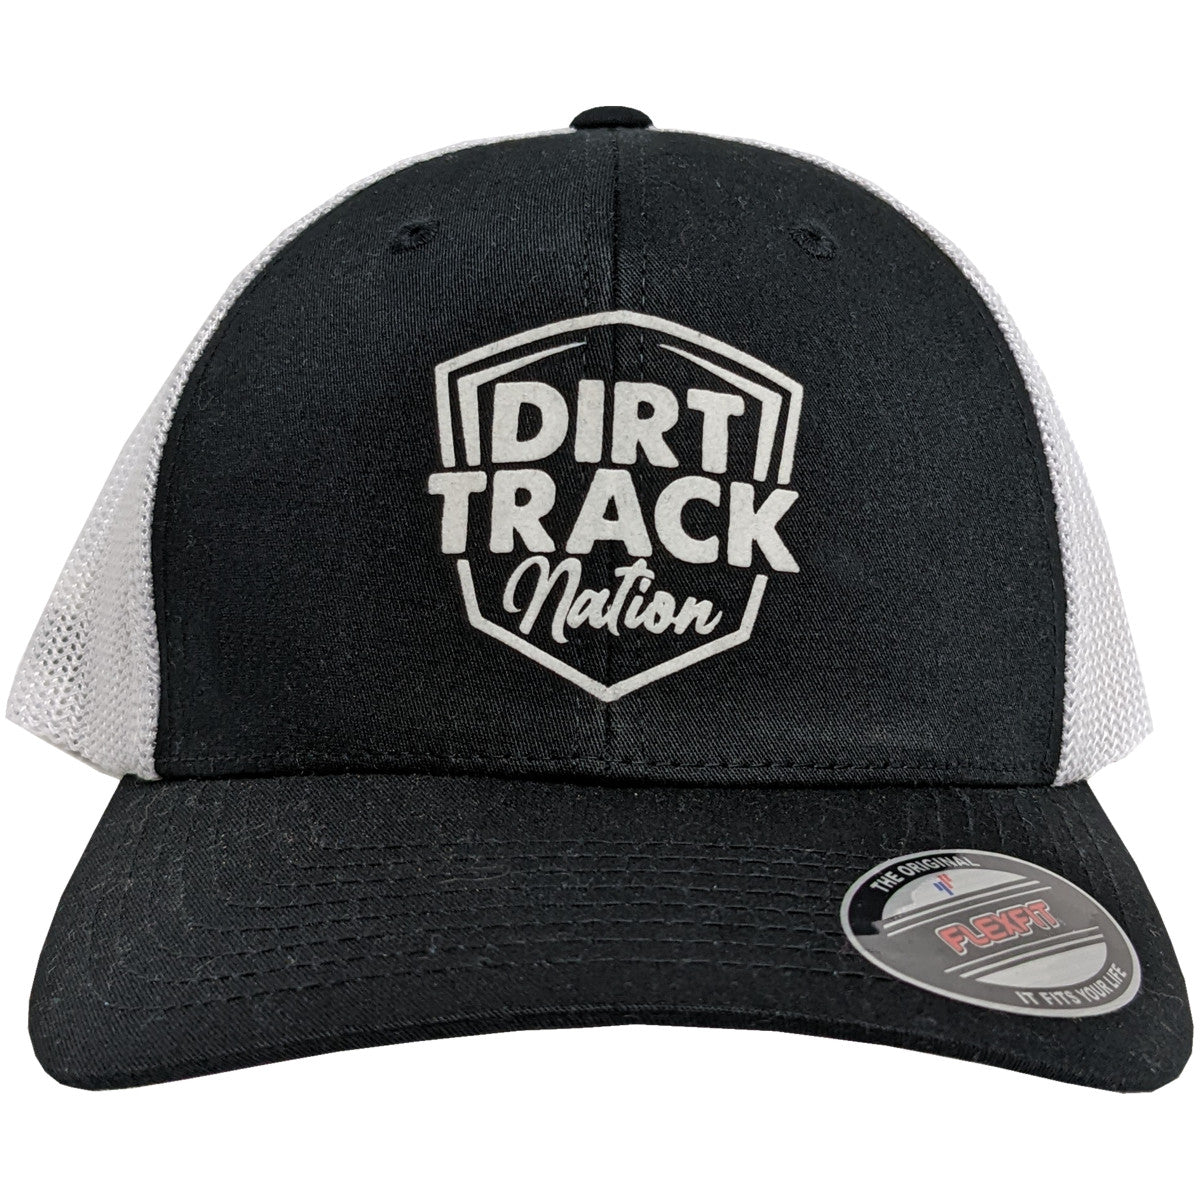 Dirt Track Nation Black w/ White Mesh Fitted Hat